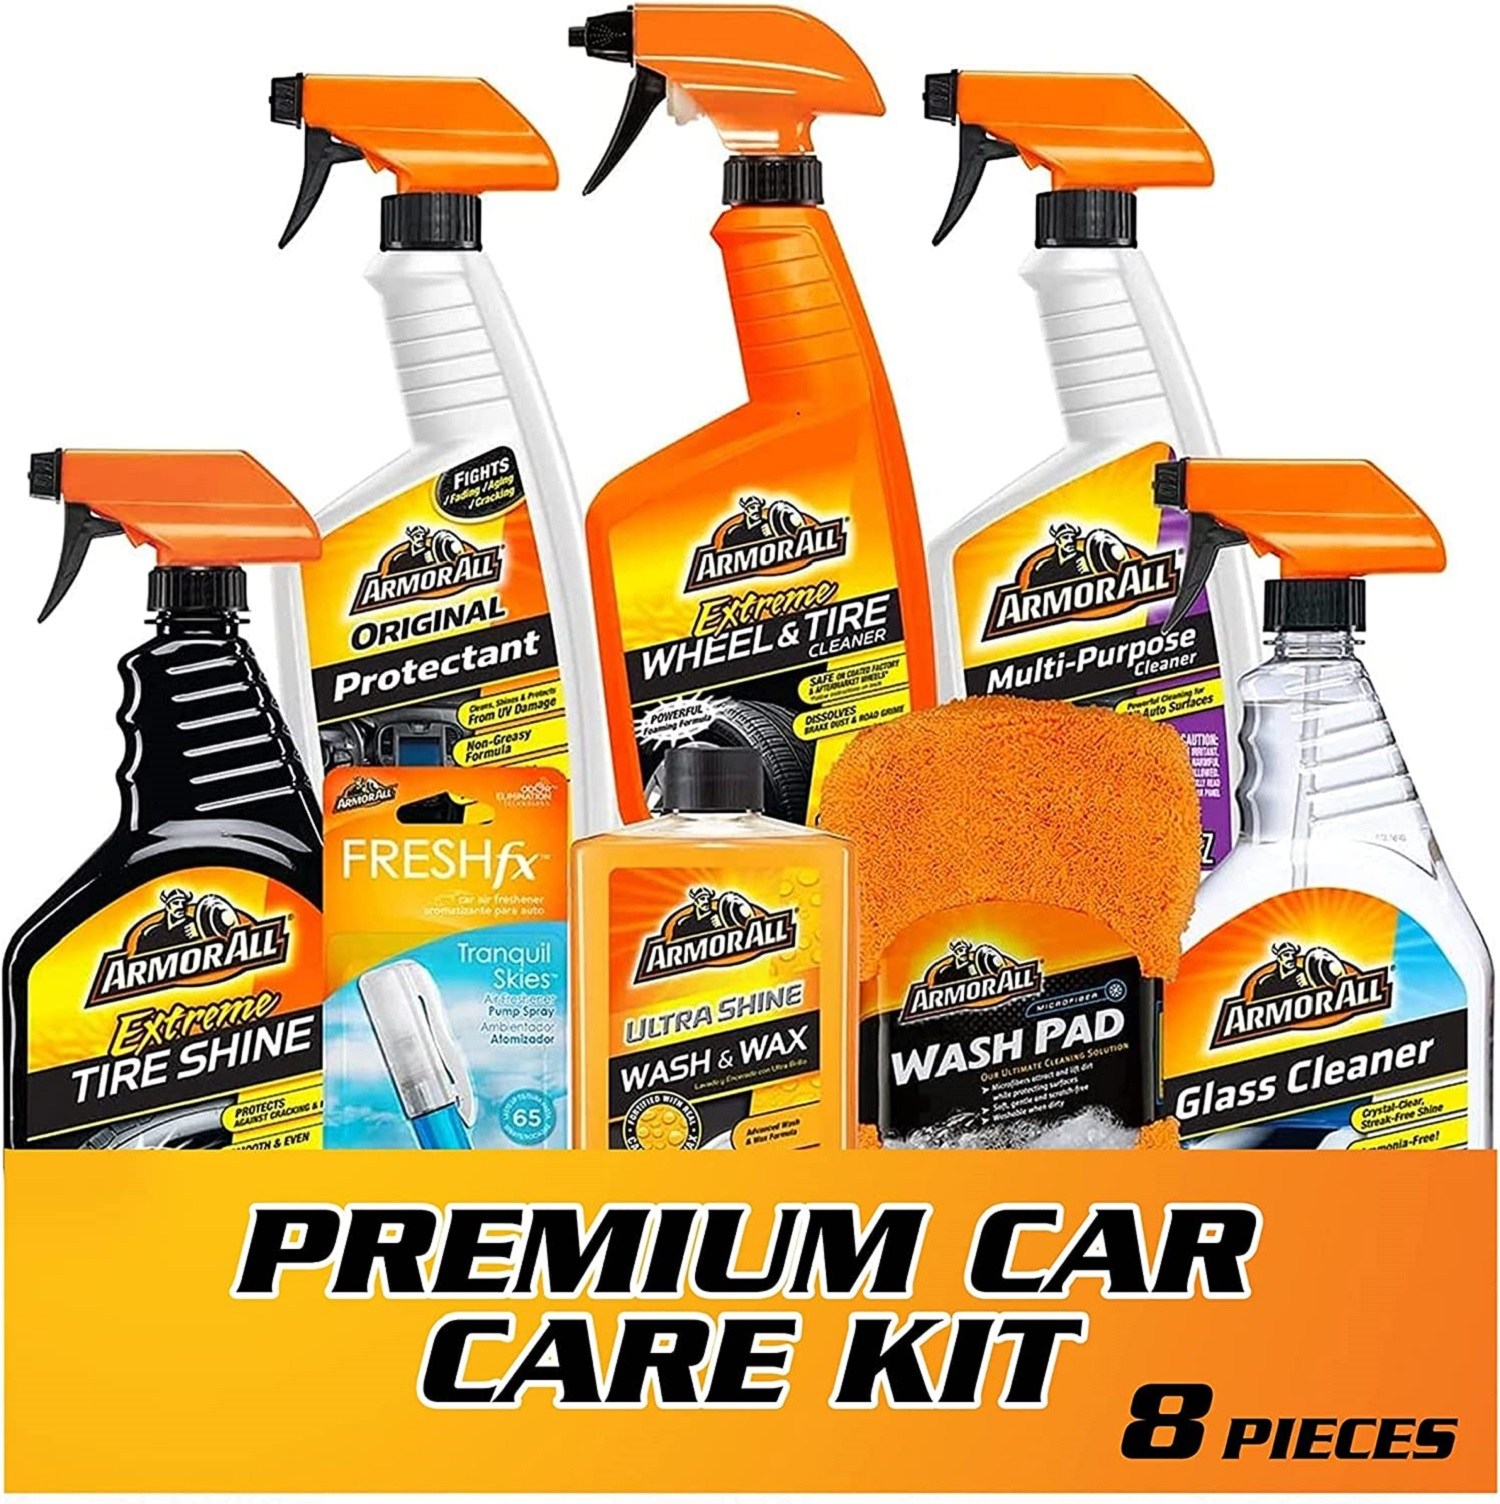 Armor All Car Wash and Car Interior Cleaner Kit, Quick Clean Kit (6pc)